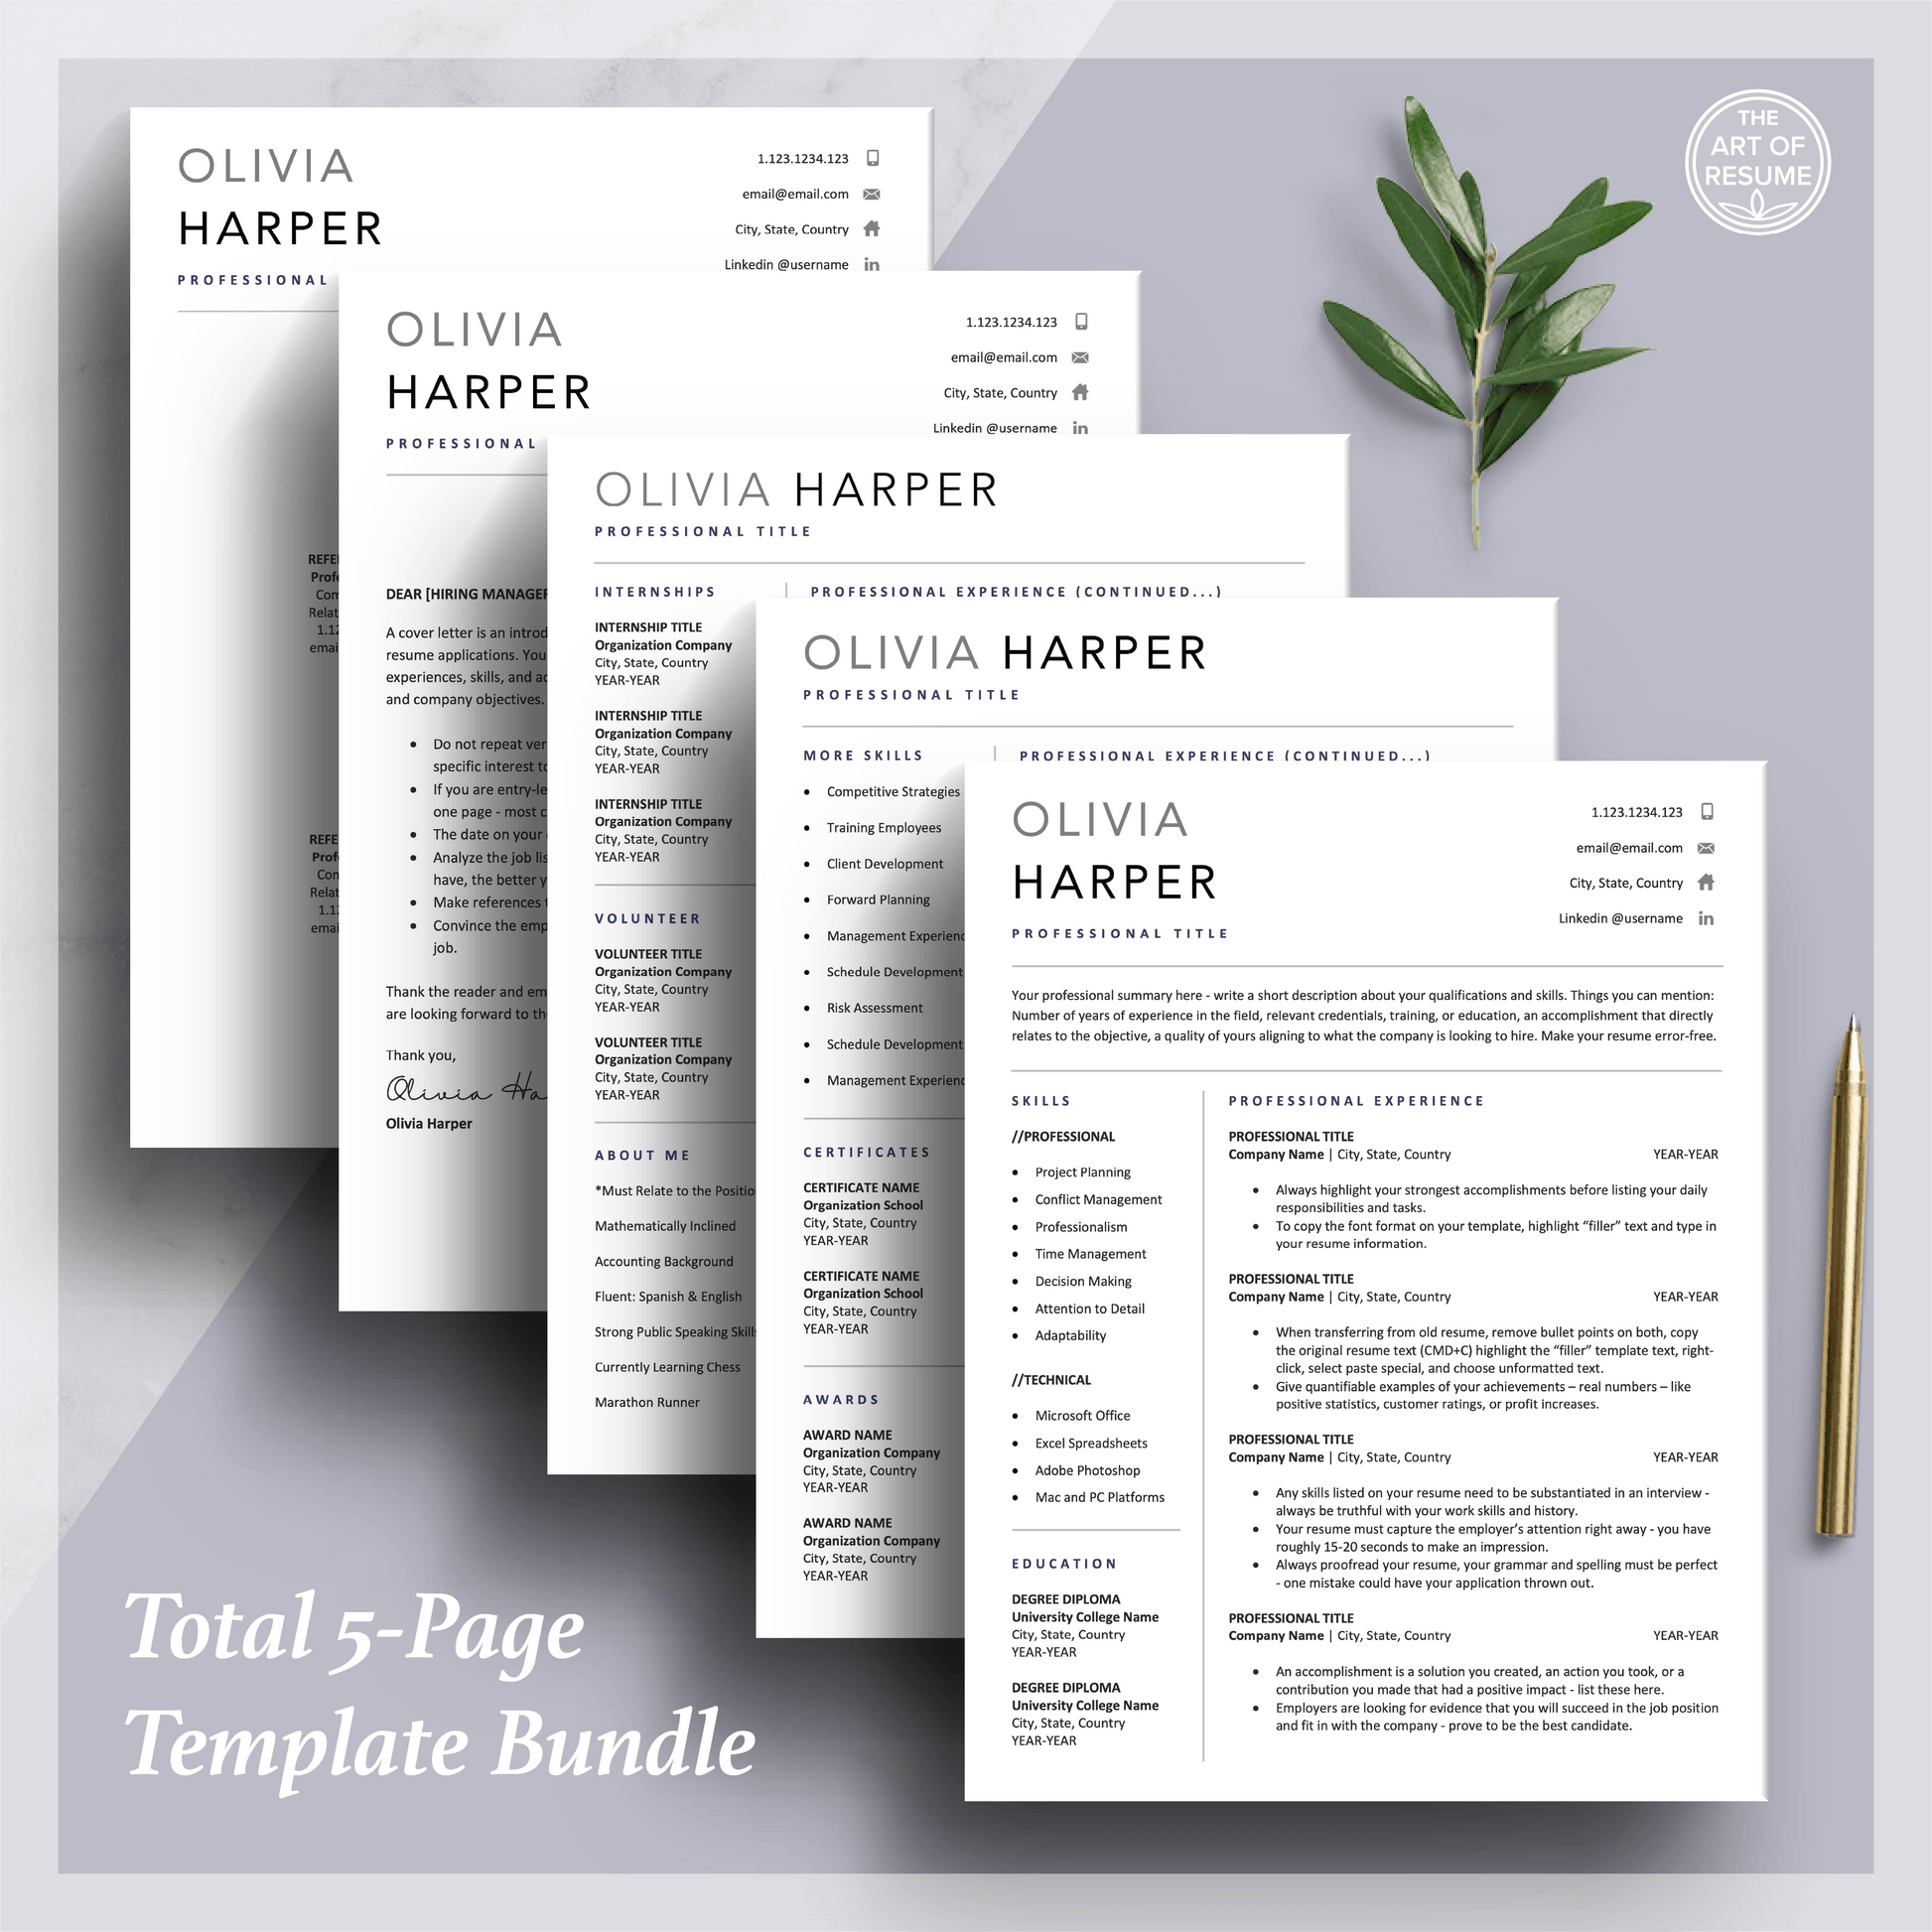 Executive Resume Template | Simple Professional CV Template | Free Cover Letter - The Art of Resume